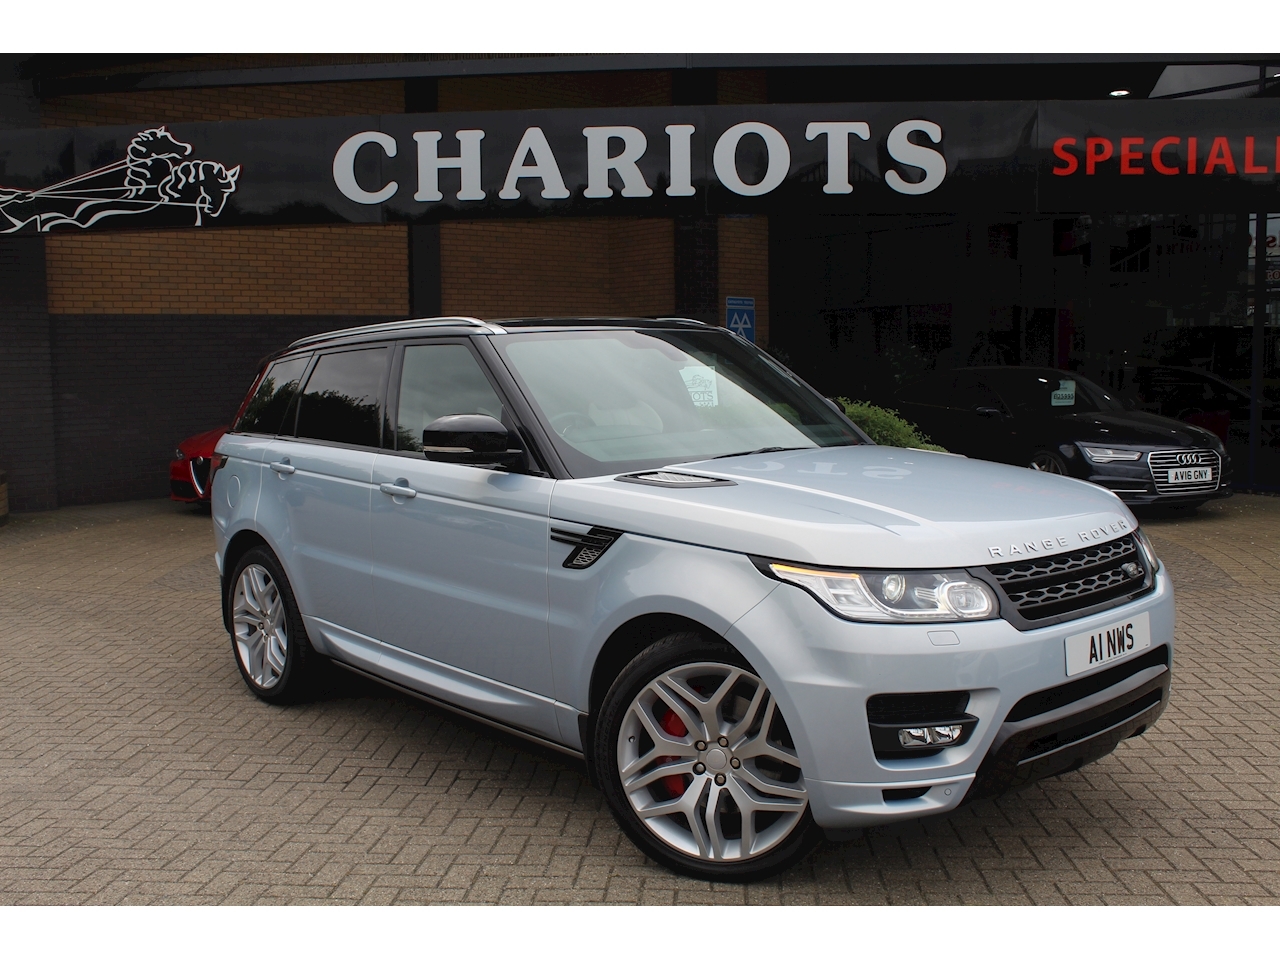 3.0 SD V6 Autobiography Dynamic SUV 5dr Diesel Automatic 4X4 (s/s) (185 g/km, 306 bhp)